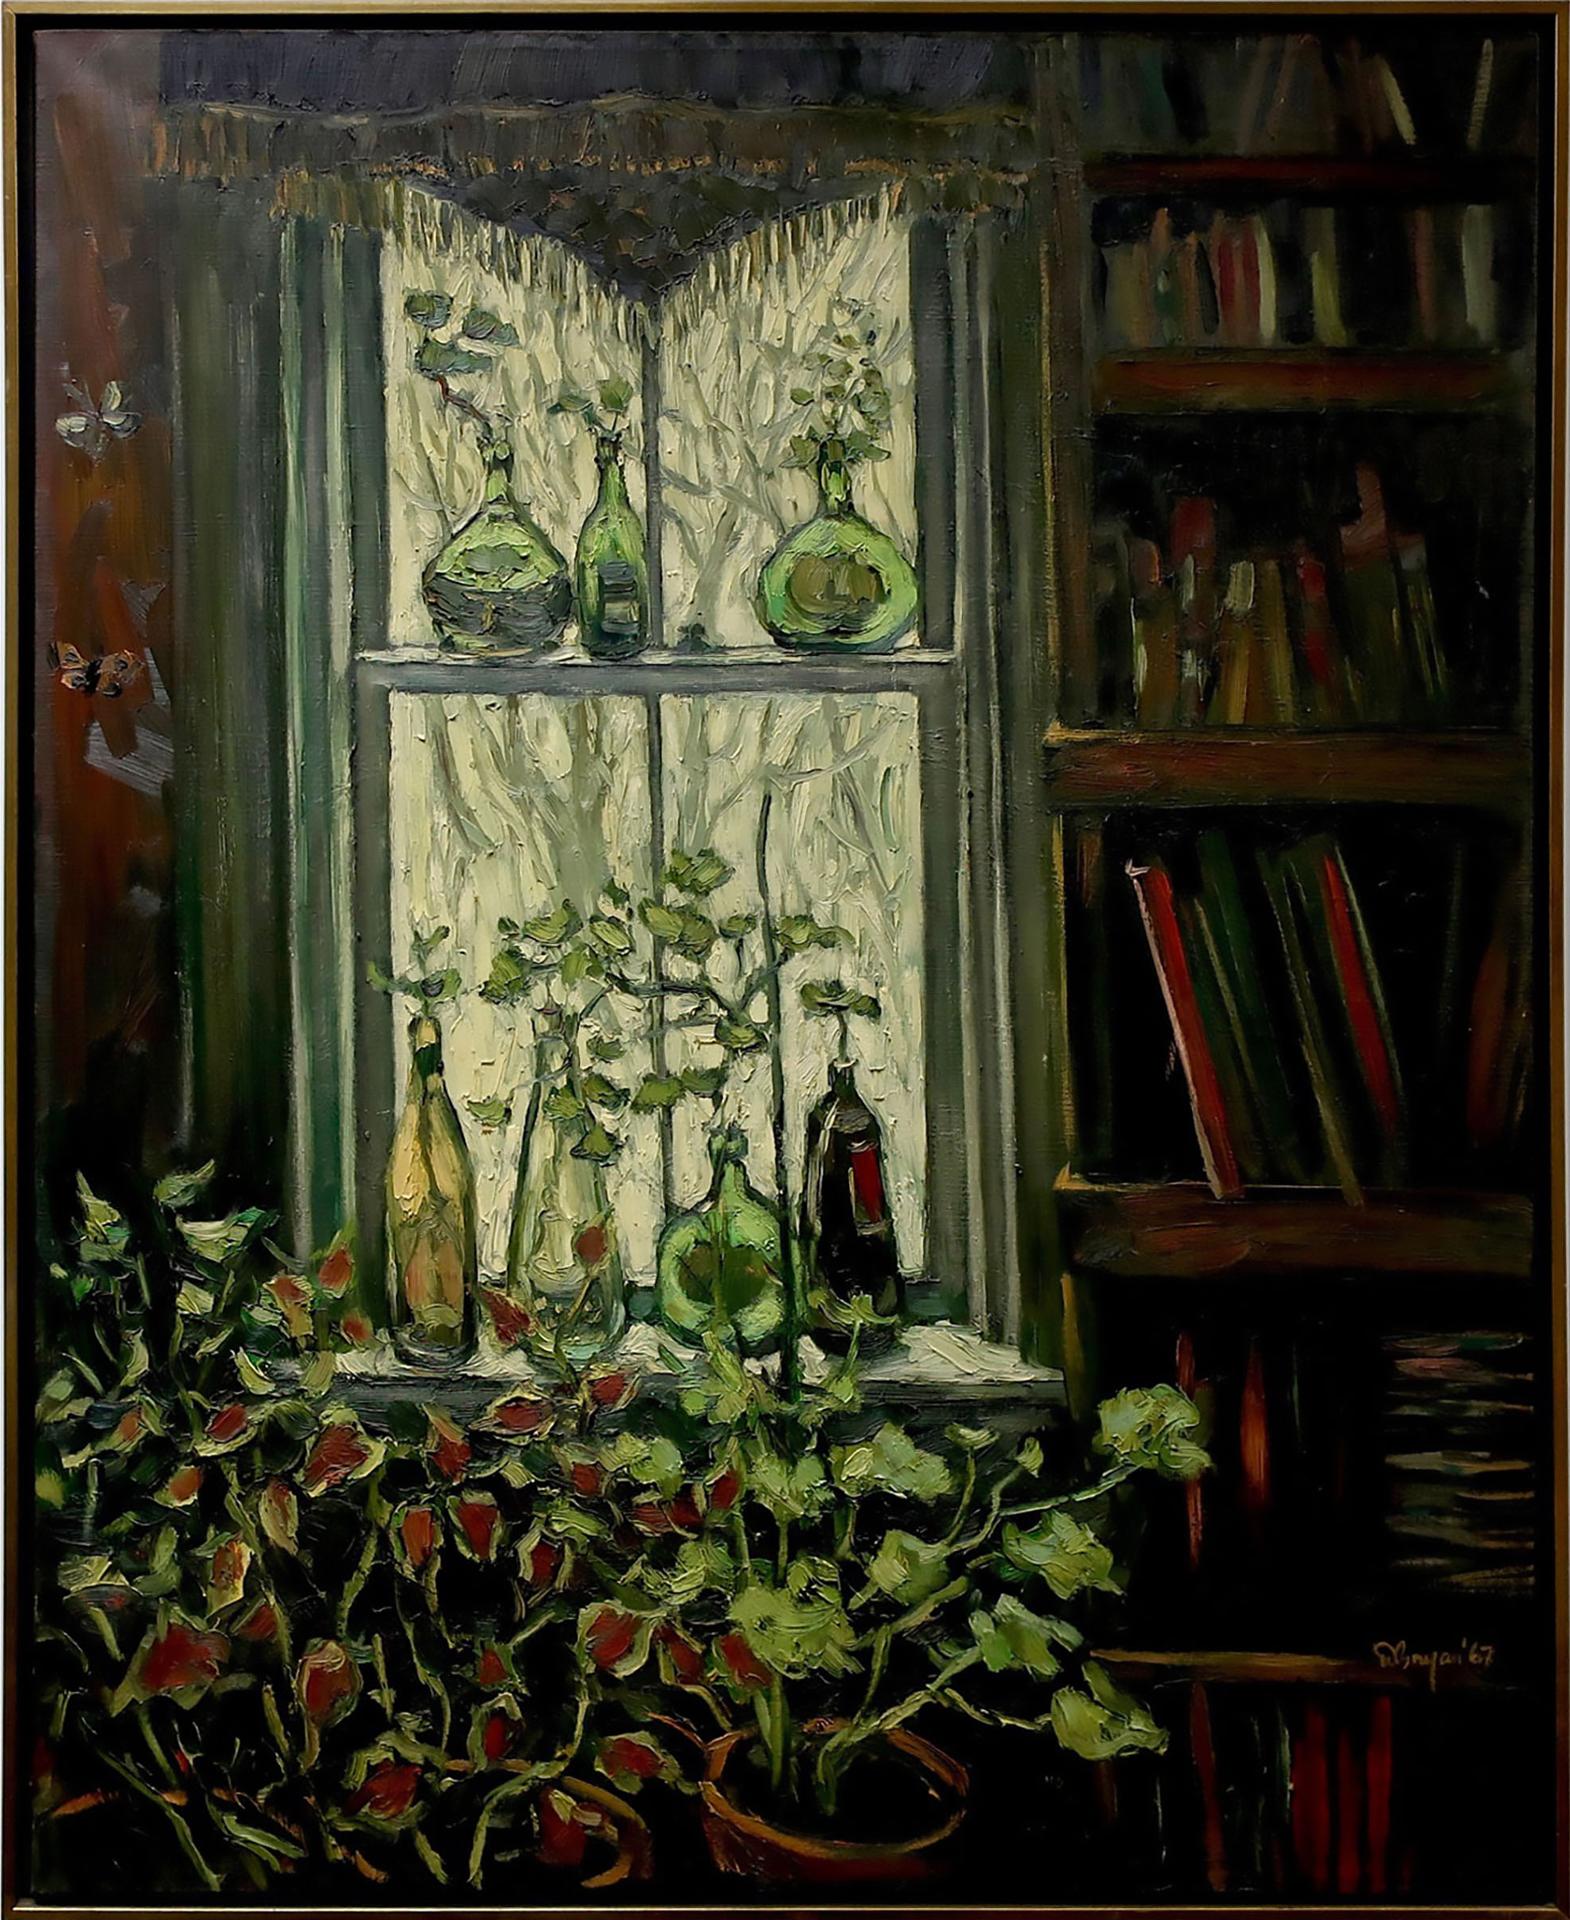 William (Bill) Bryan - Untitled (Interior Study With Window, Plants, Books And Bottles)